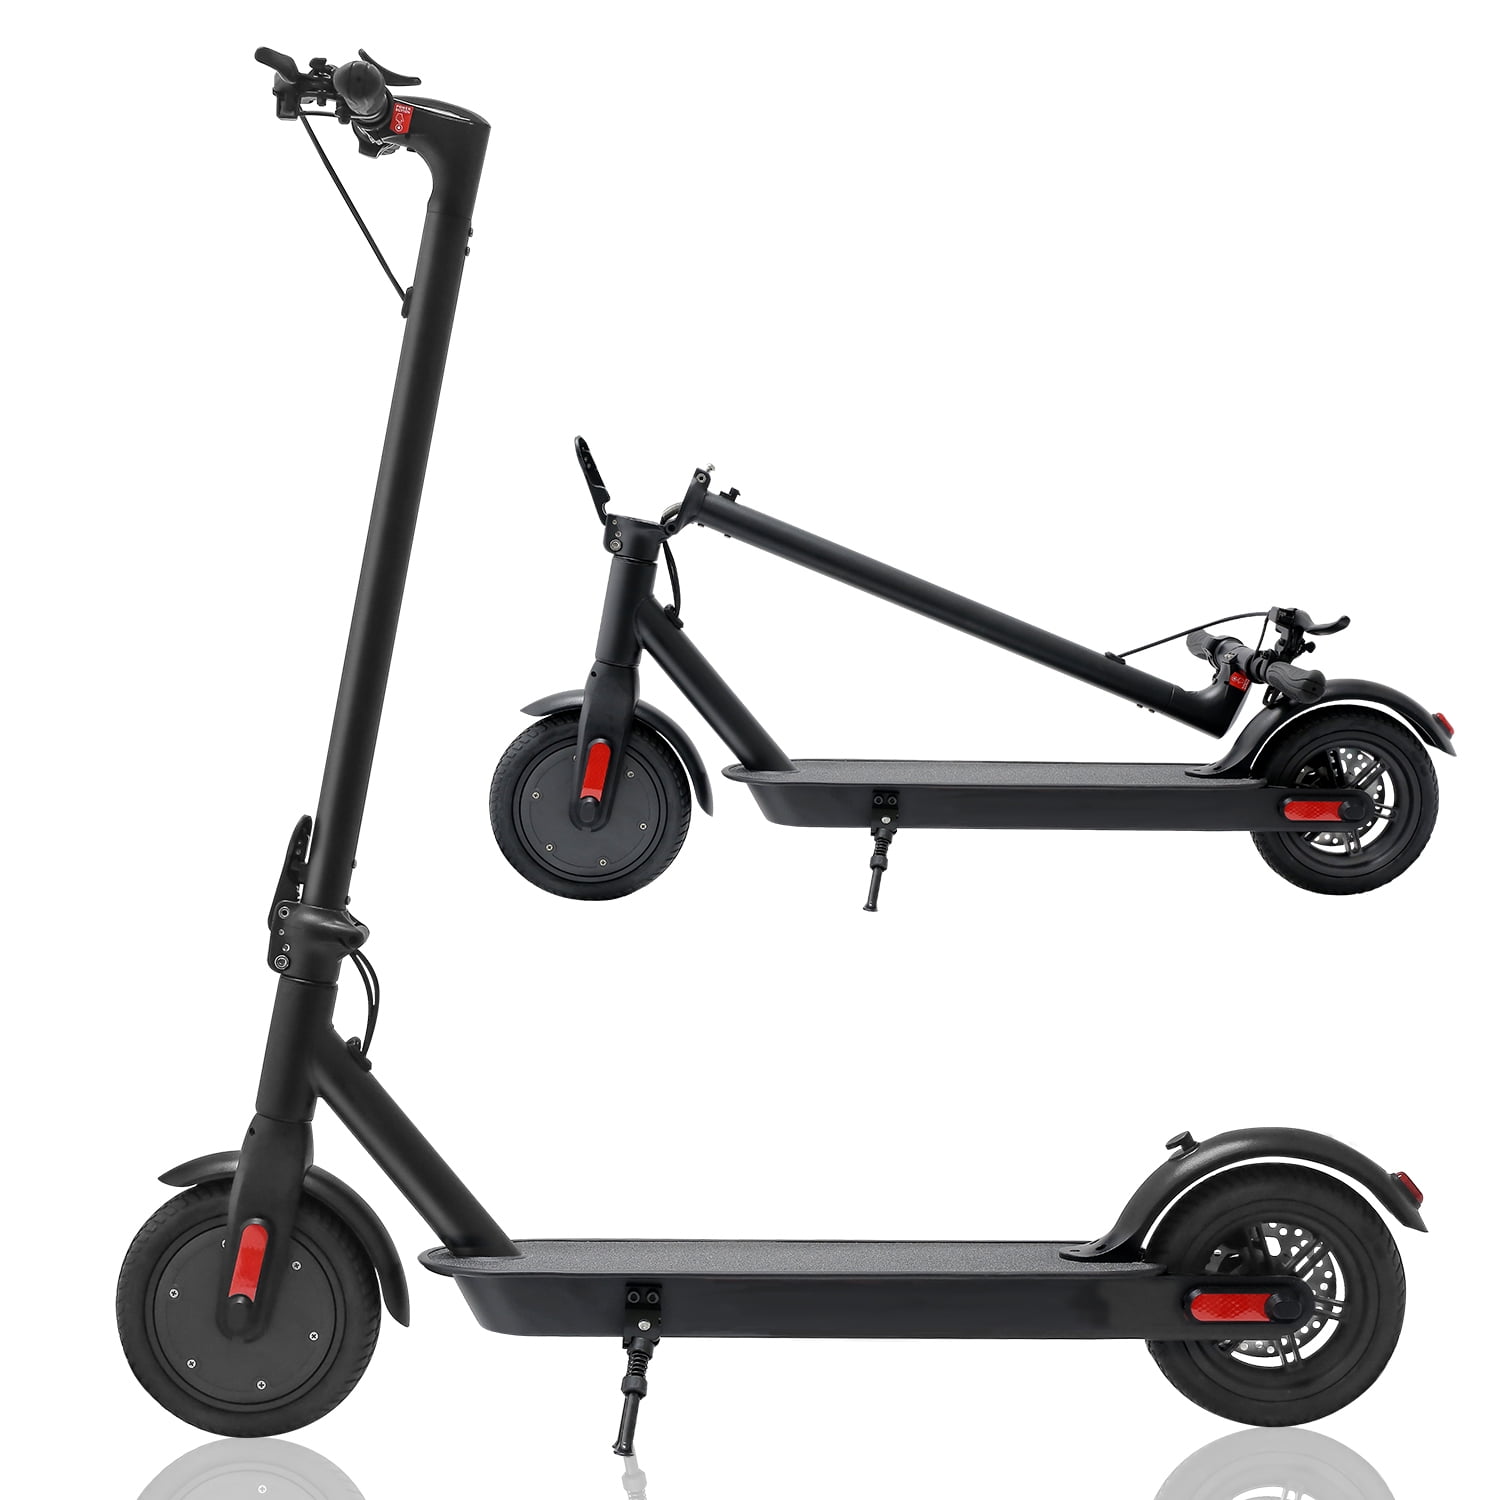 Commuting Electric Scooter Lightweight Folding Electric Scooters with Led Lights,for Kids 8 Years and up US Stock Ninasill 8 Folding Electric Scooter for Adults